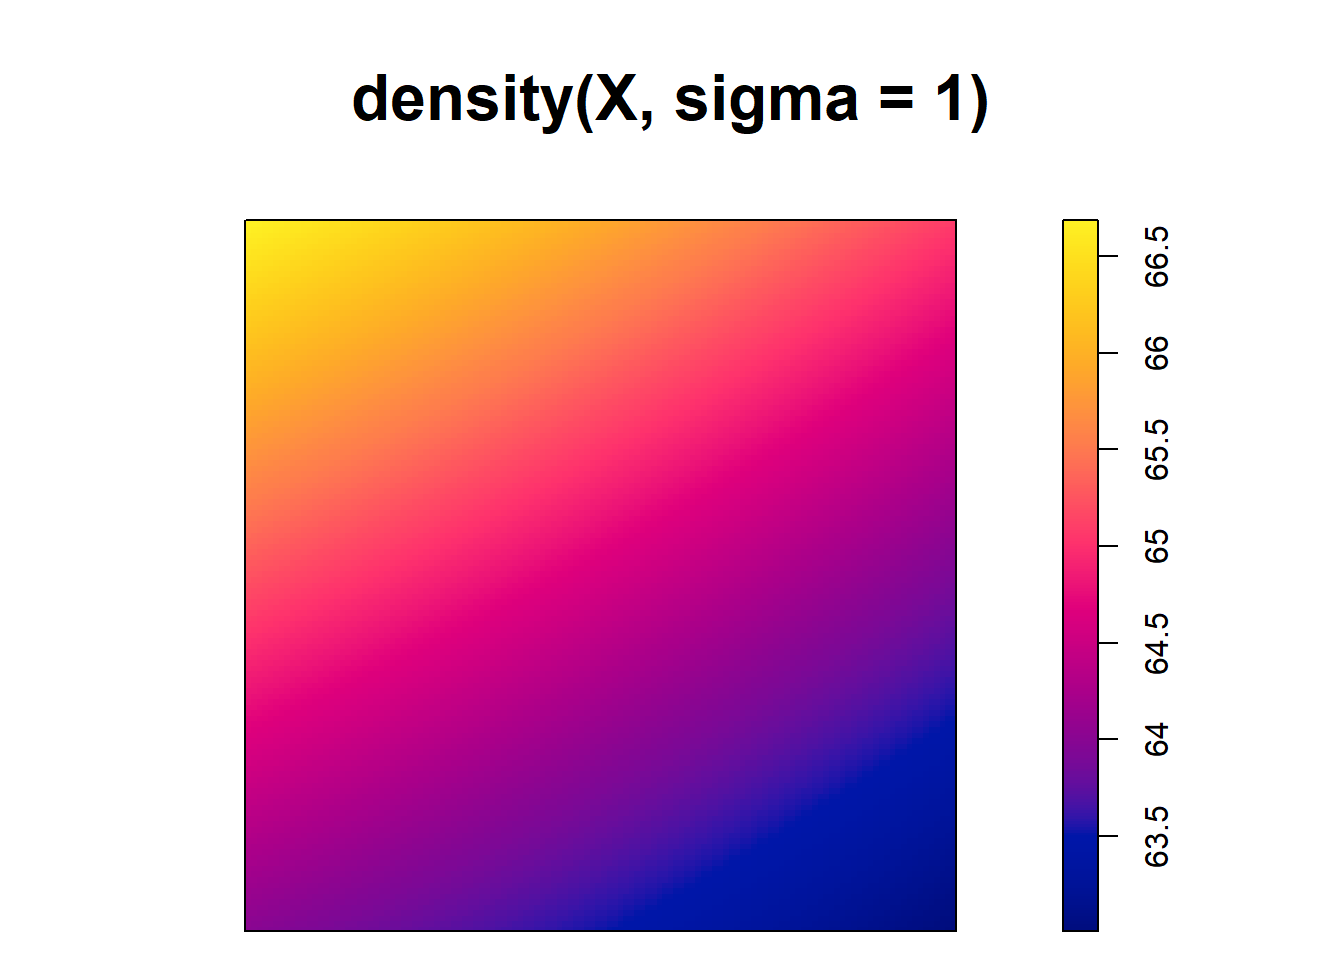 Top: Trees point pattern. Bottom: Intensity estimates using several values for the kernel bandwidth.